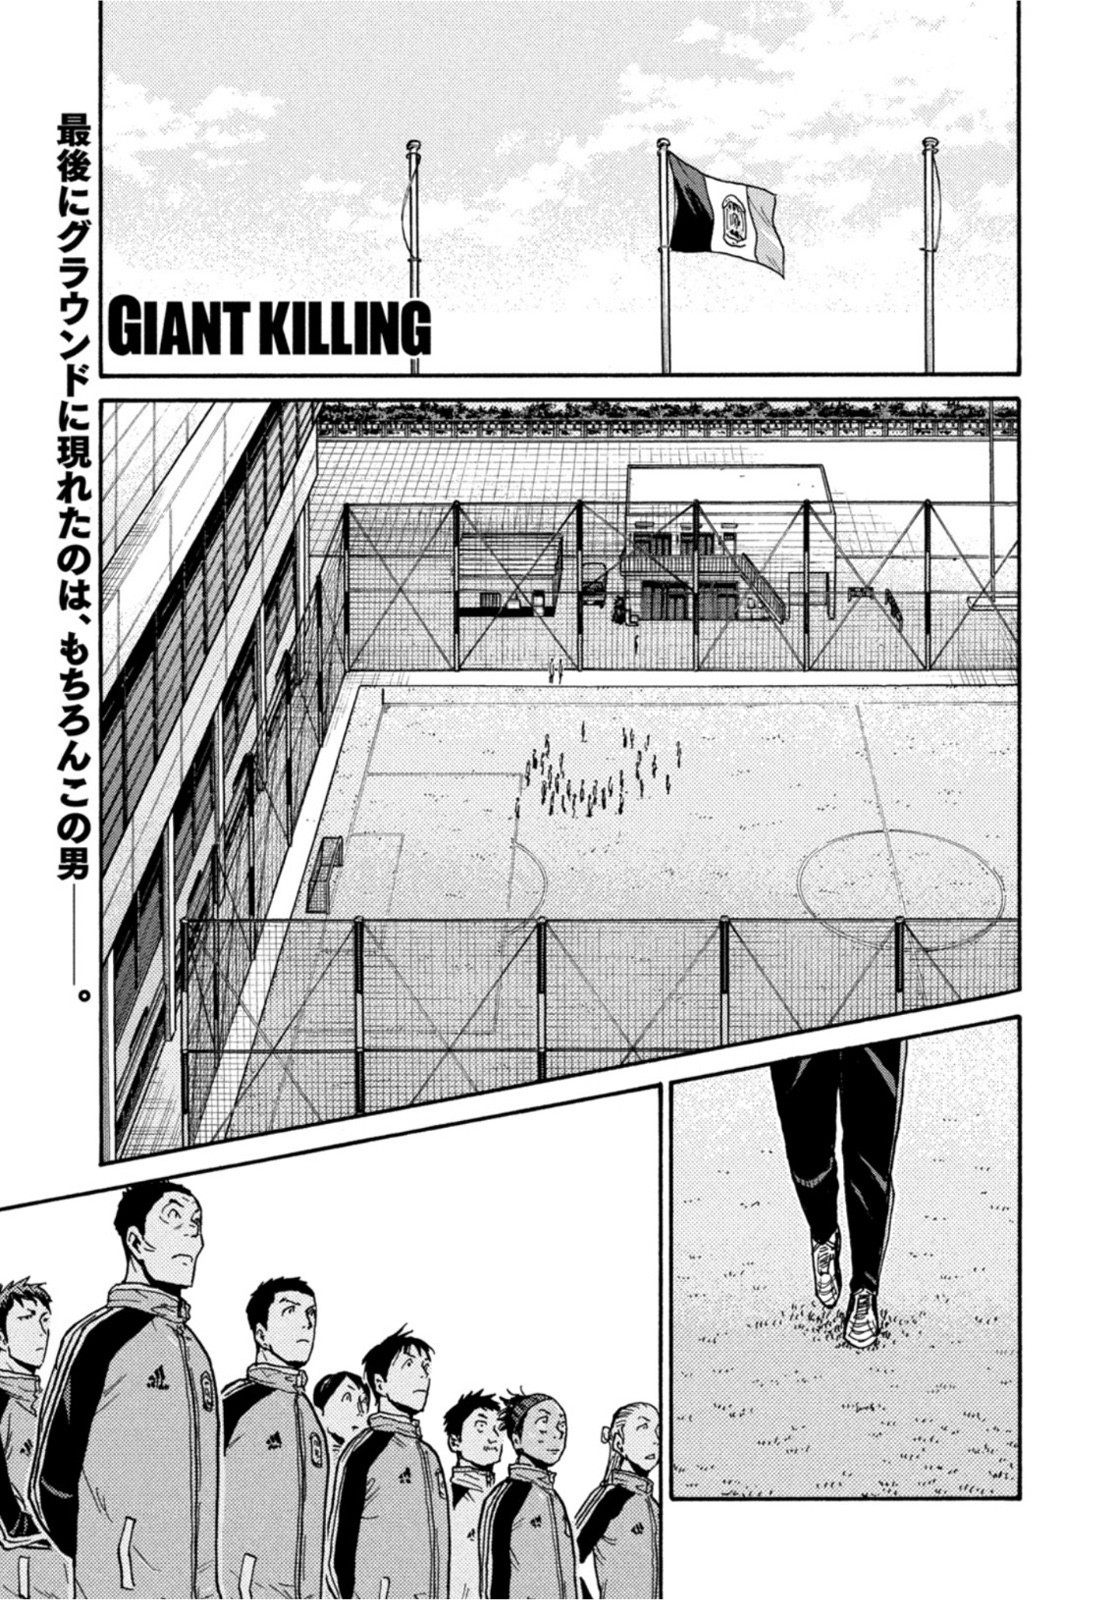 Giant Killing - Chapter 599 - Page 1